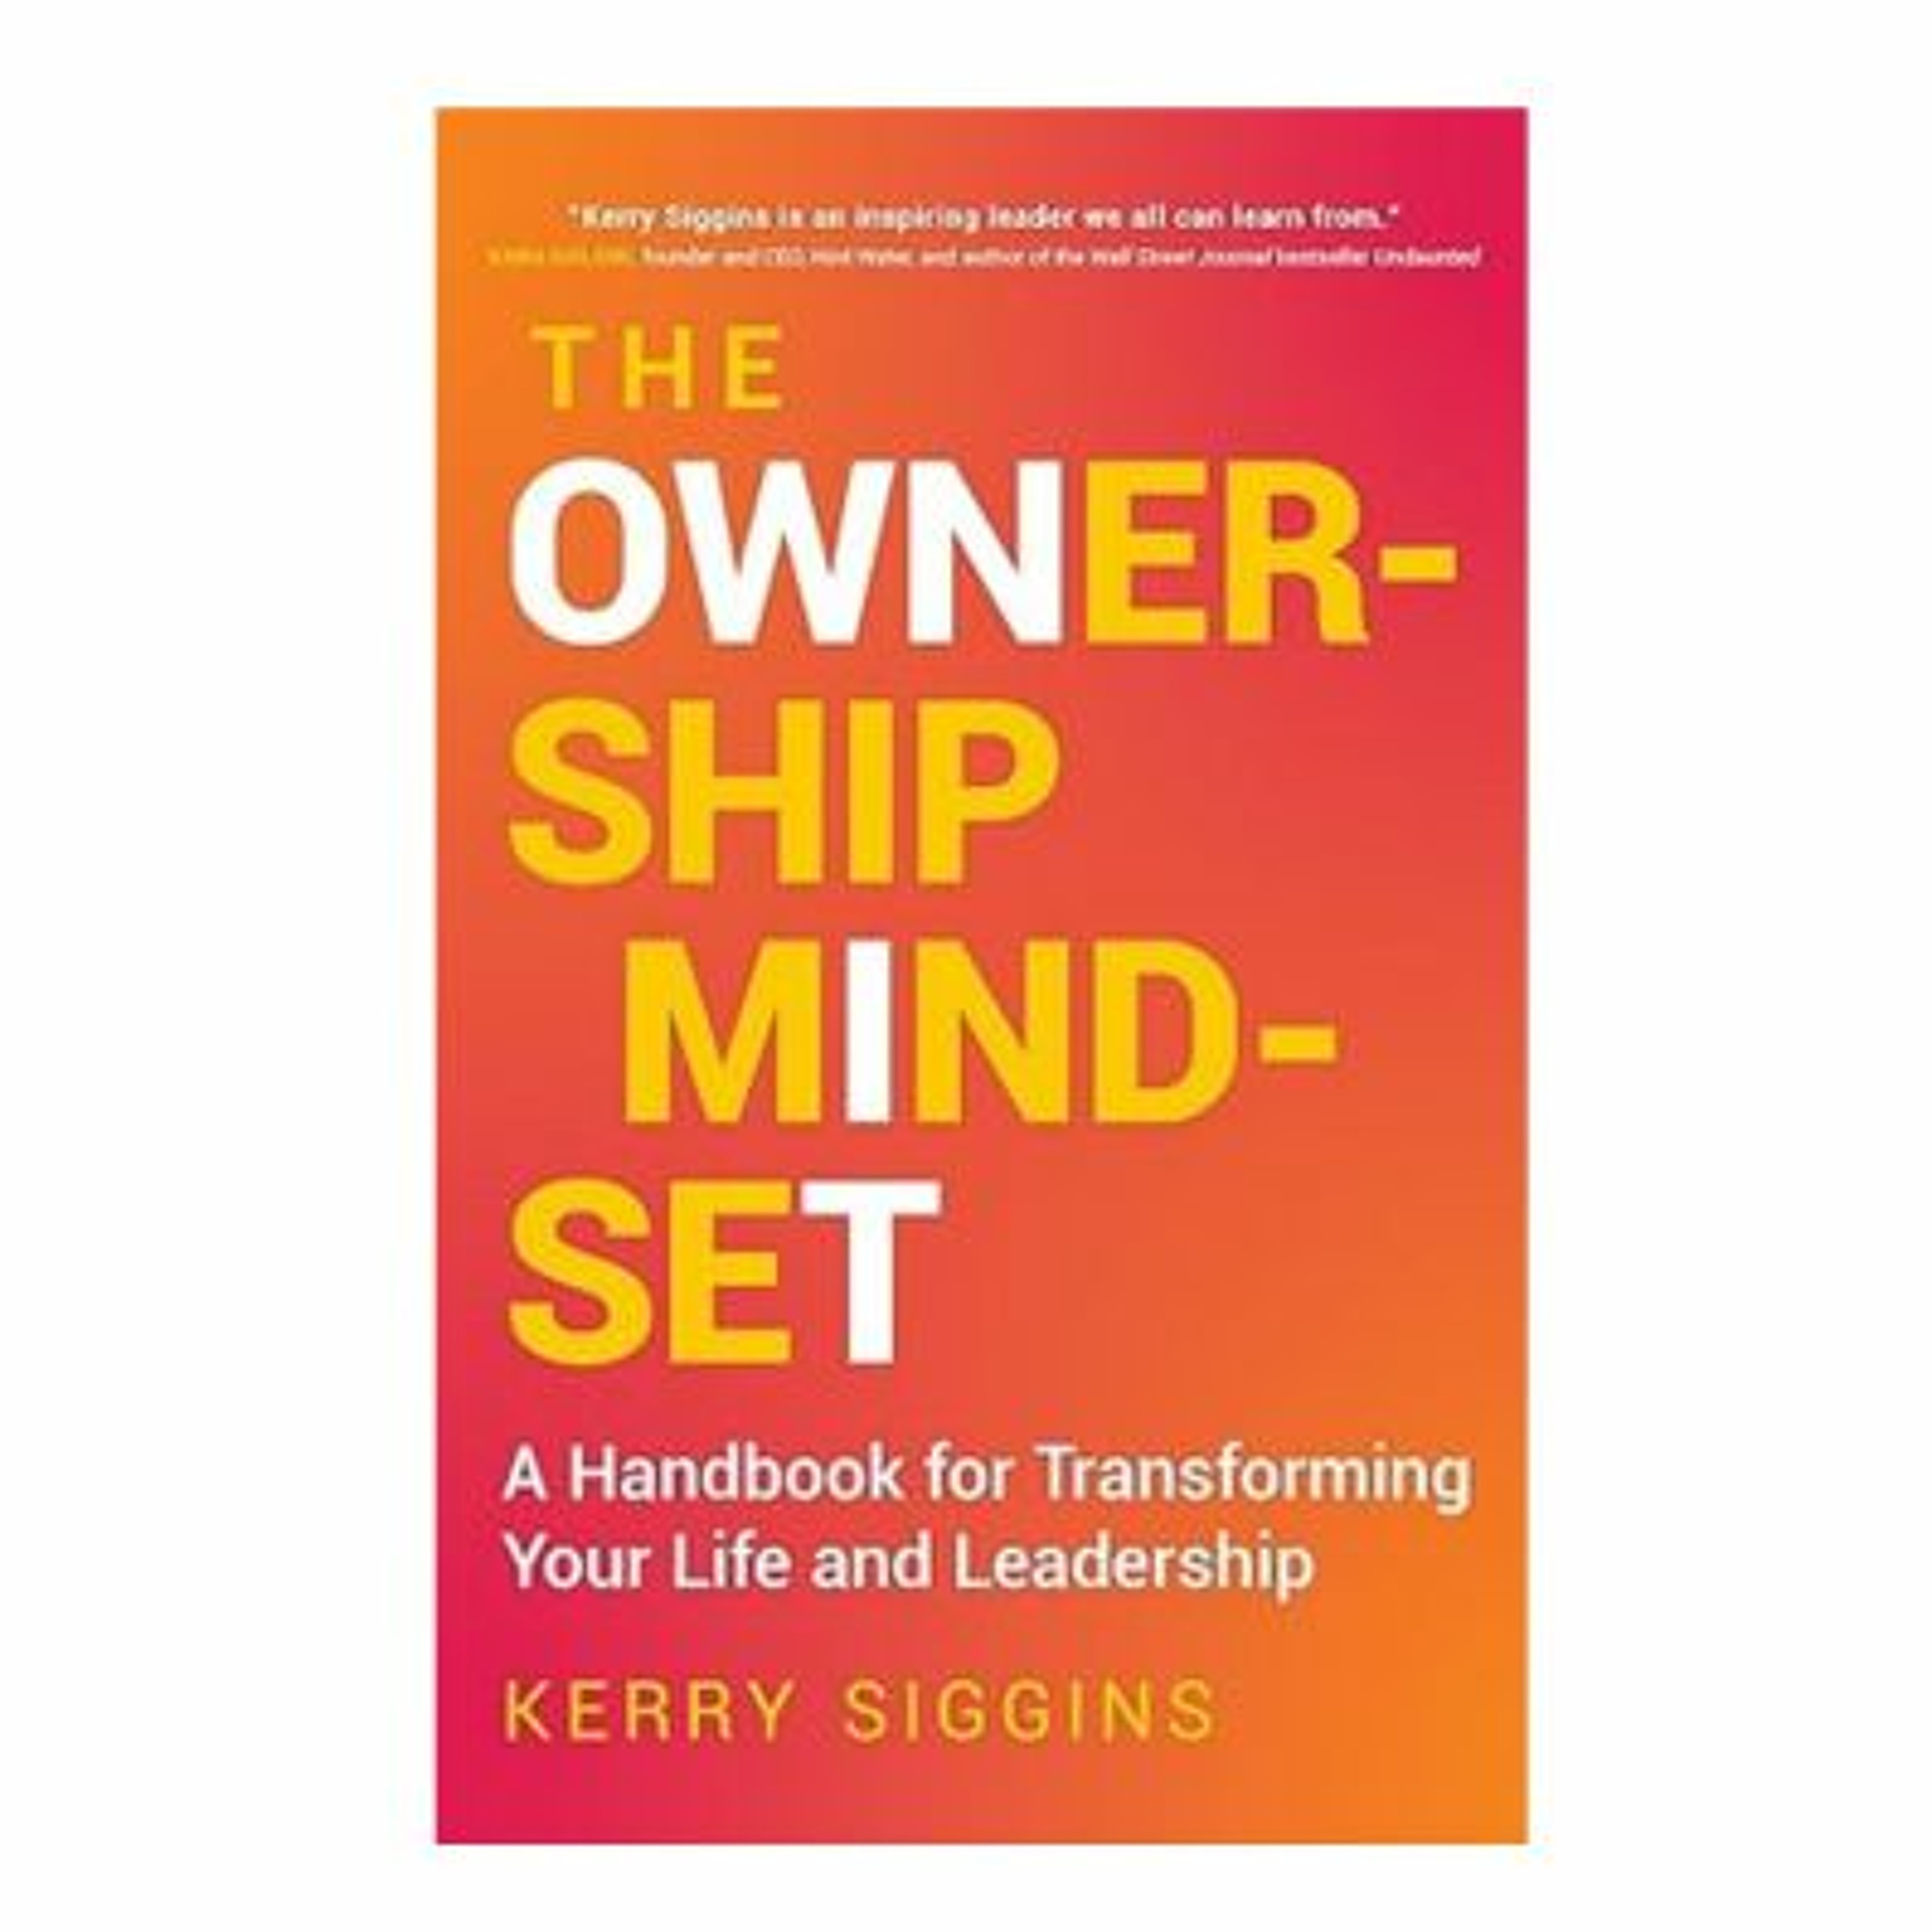 Podcast 1103: The Ownership Mindset with Kerry Siggins